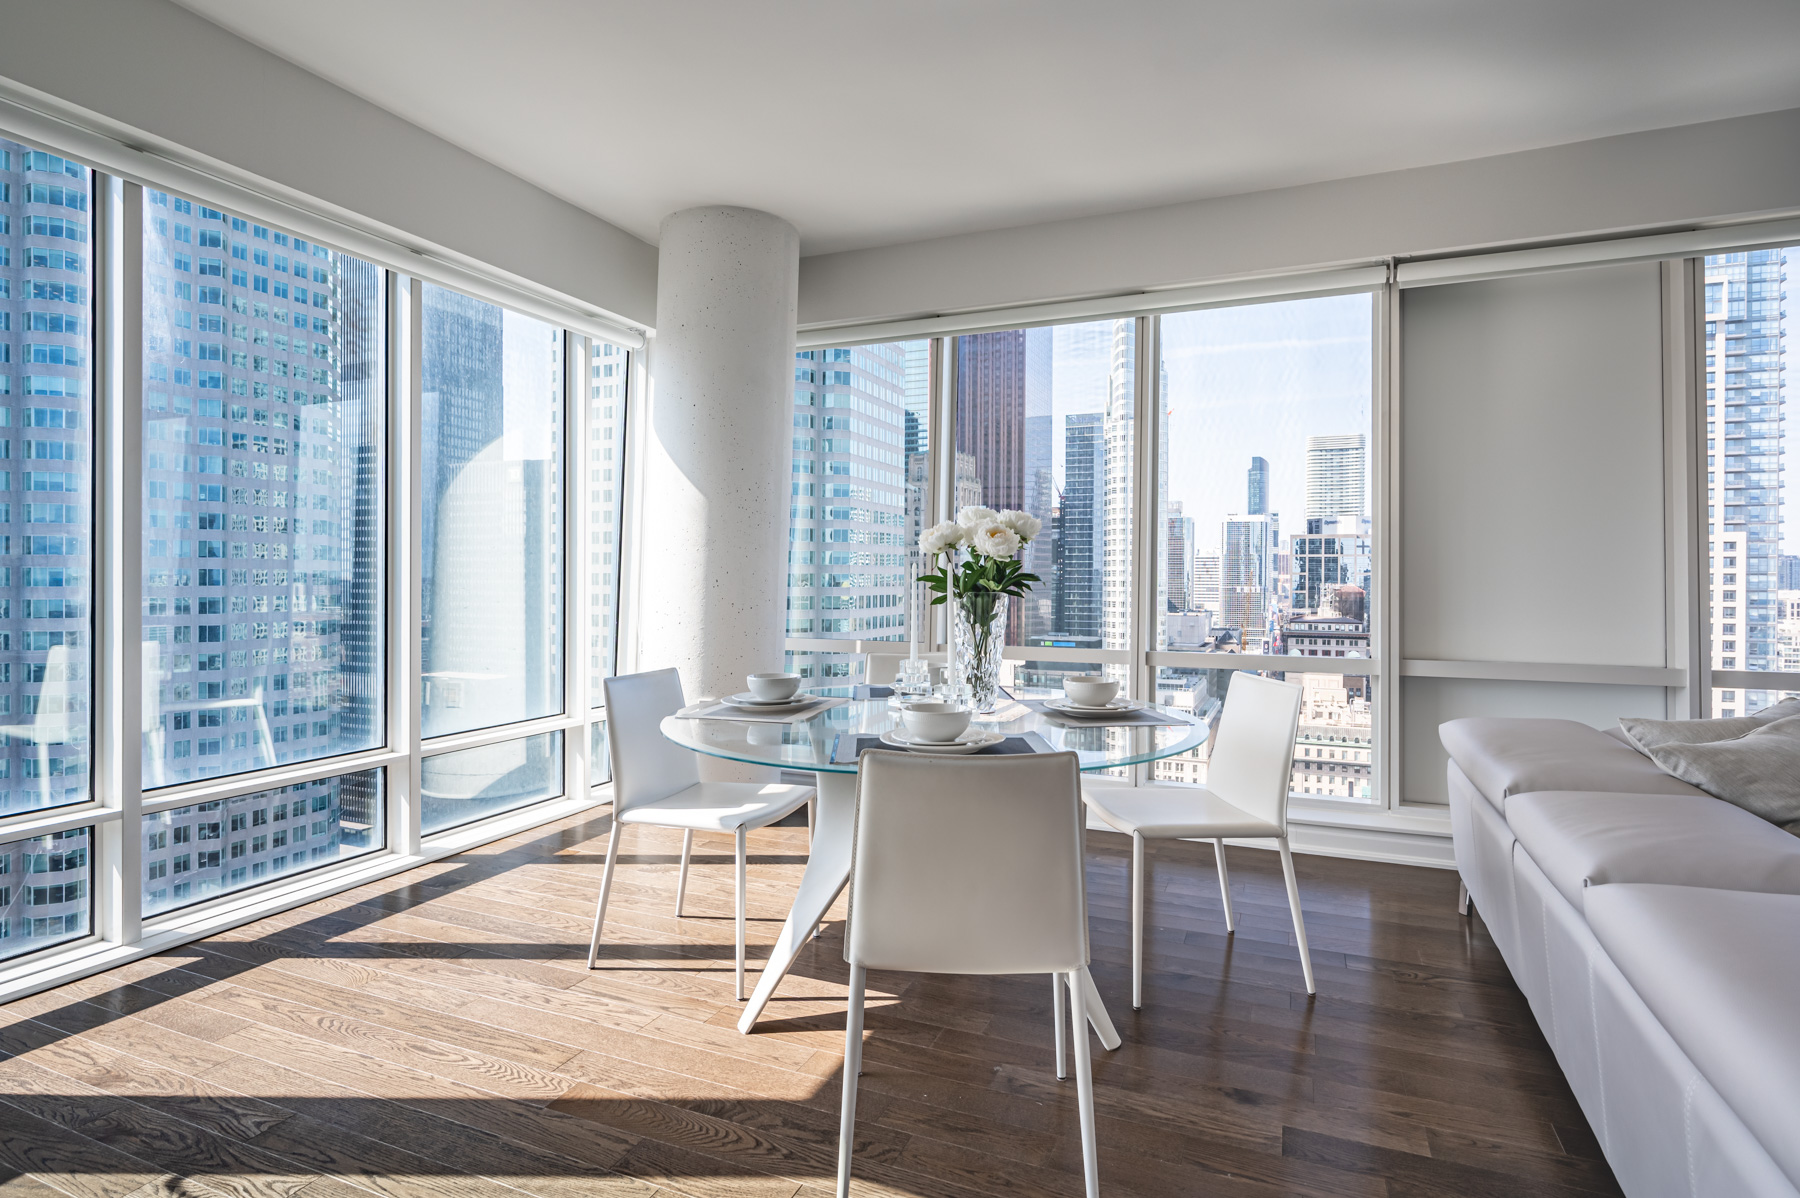 Condo dining room with view of Toronto through large windows.